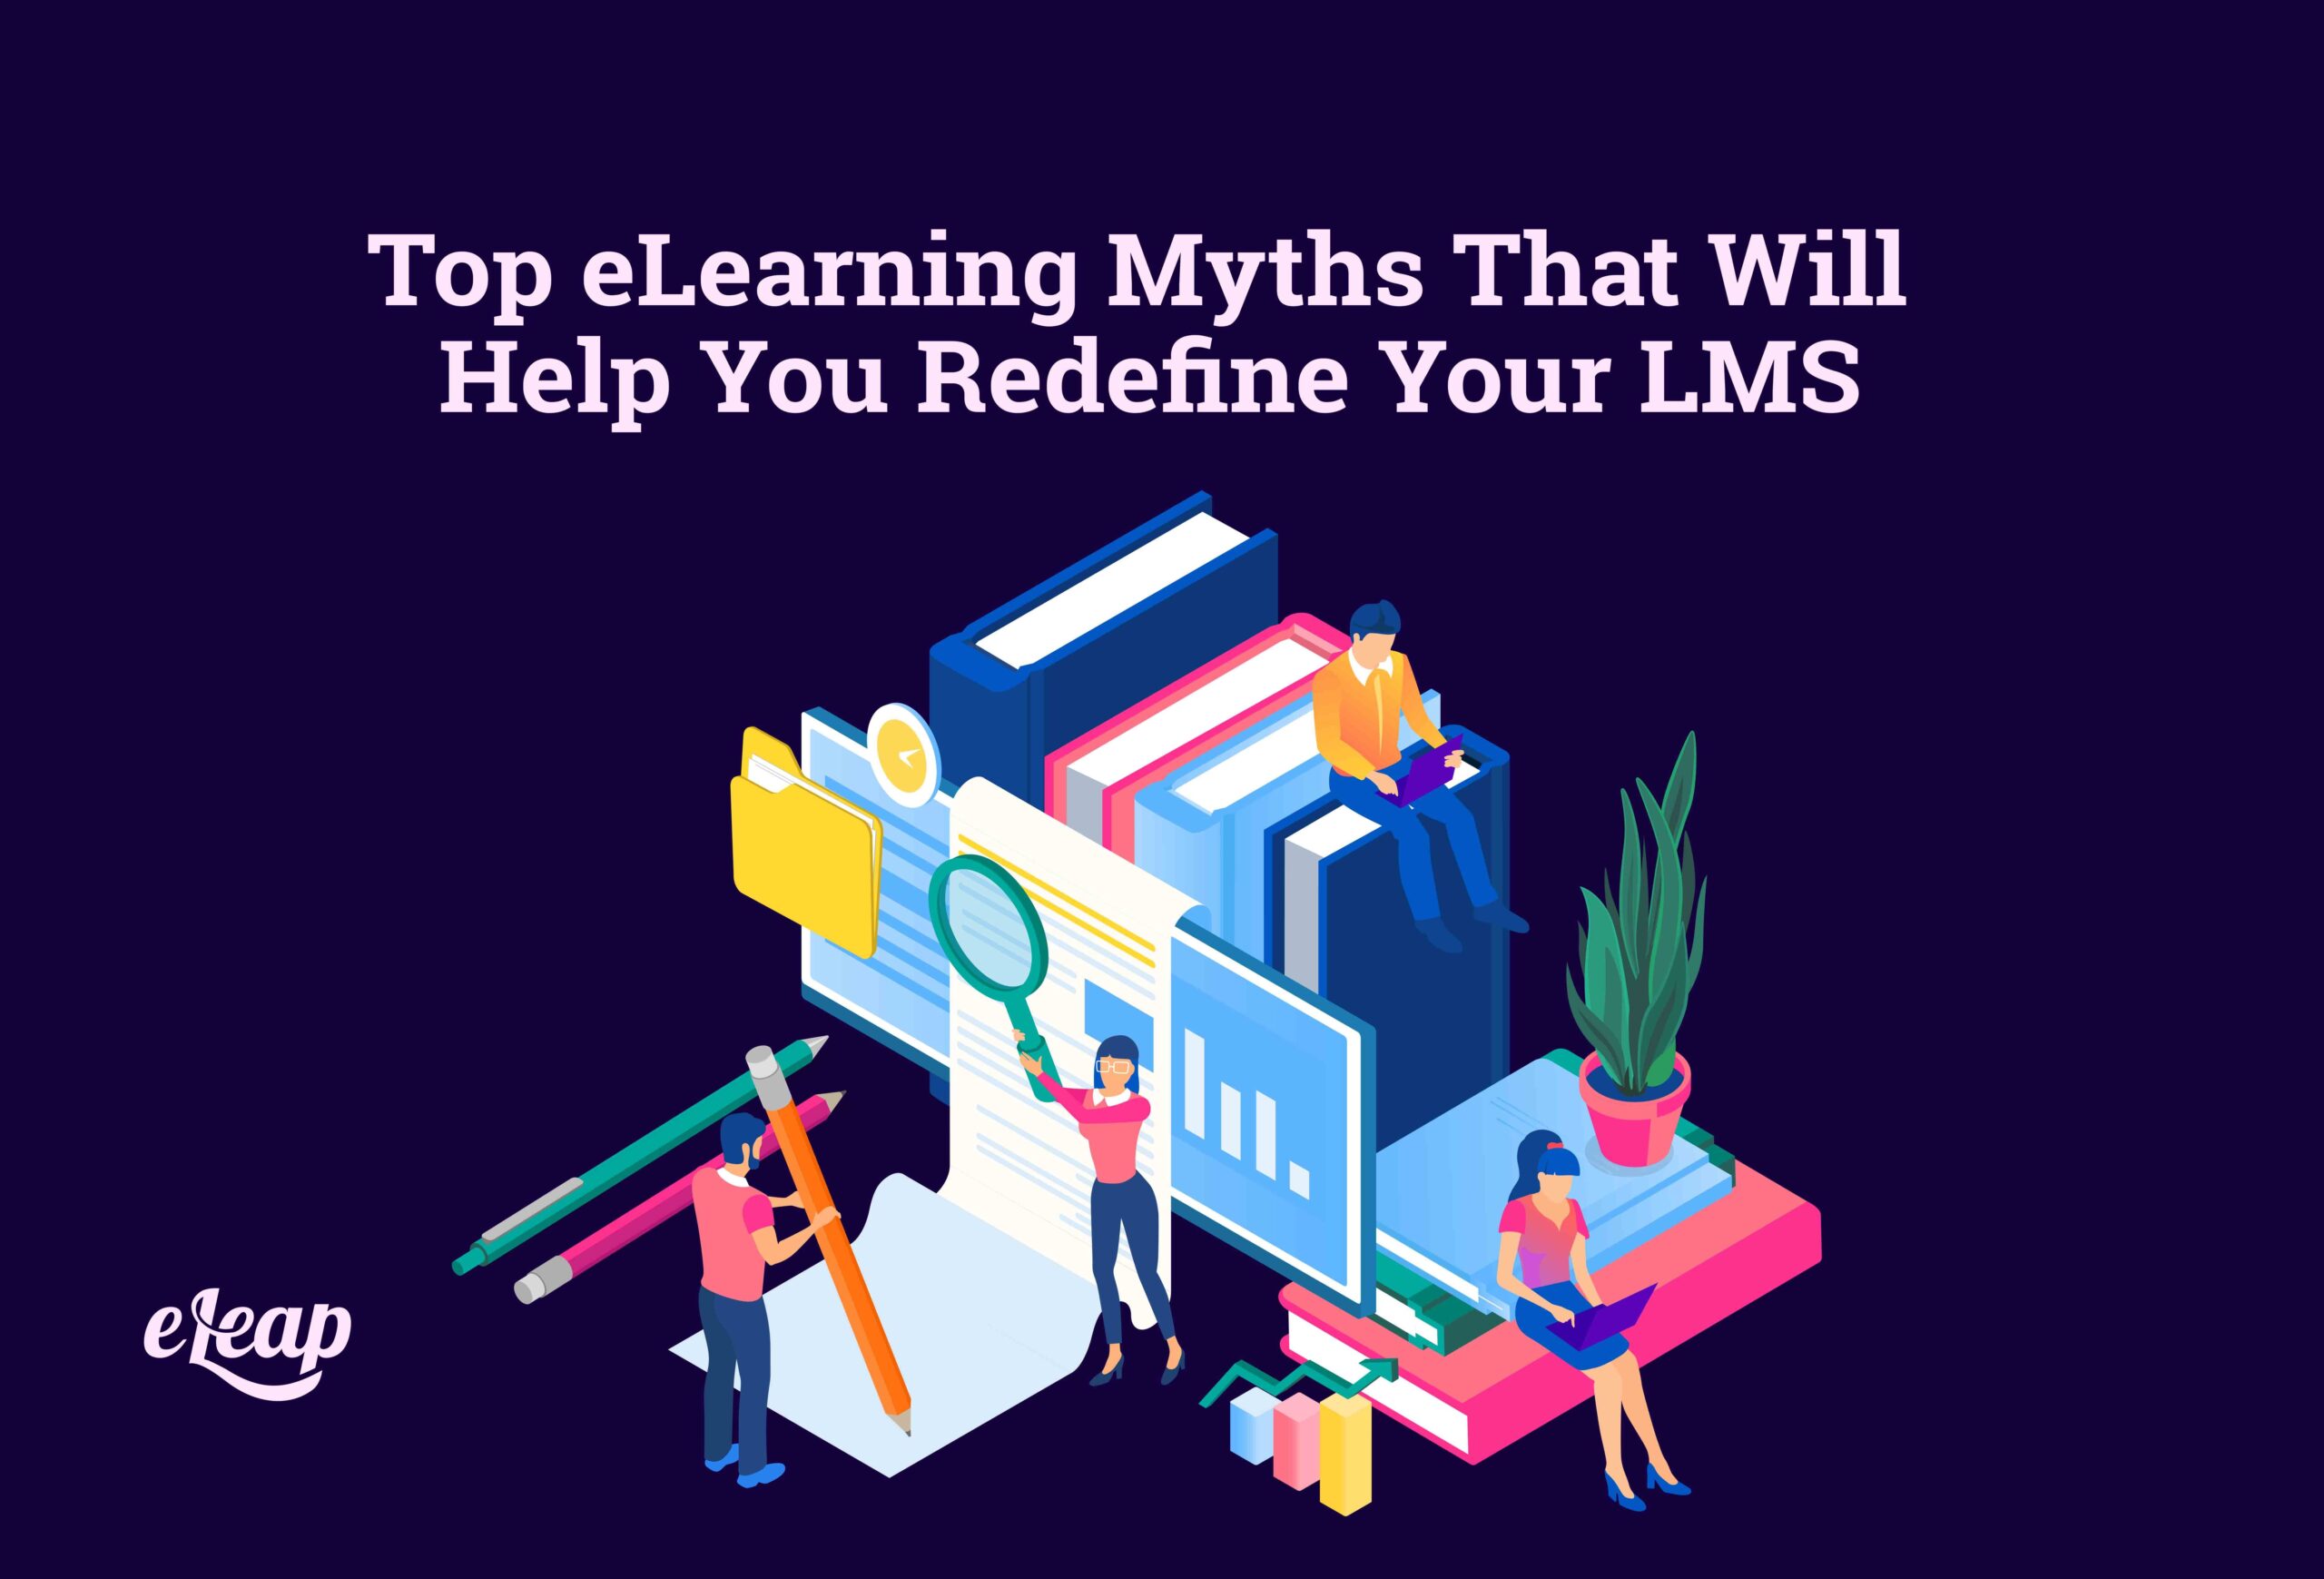 Top eLearning Myths That Will Help You Redefine Your LMS